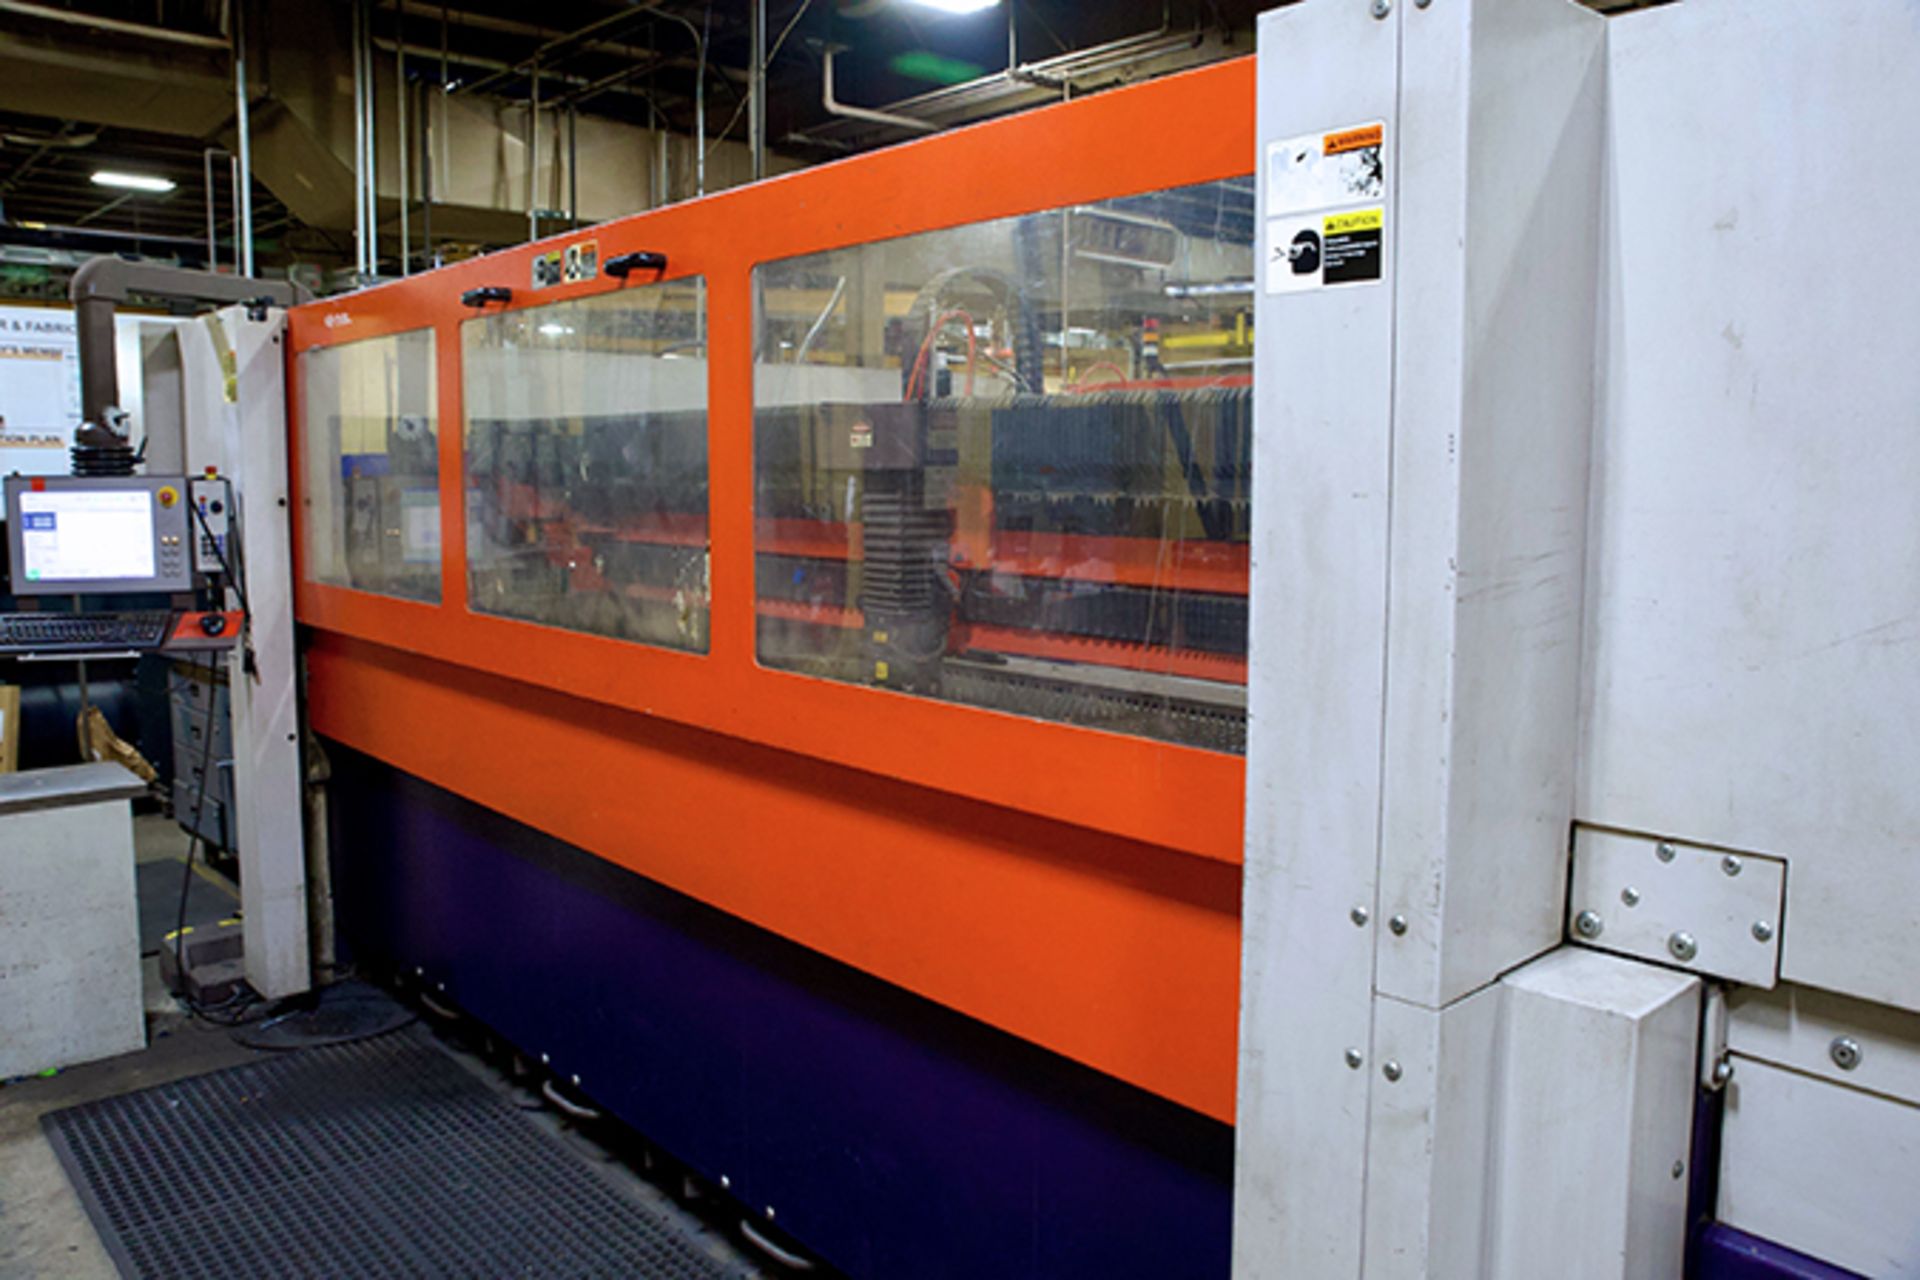 Bystronic Bystar 3015 Laser Cutting Machine (2007) - Image 11 of 13